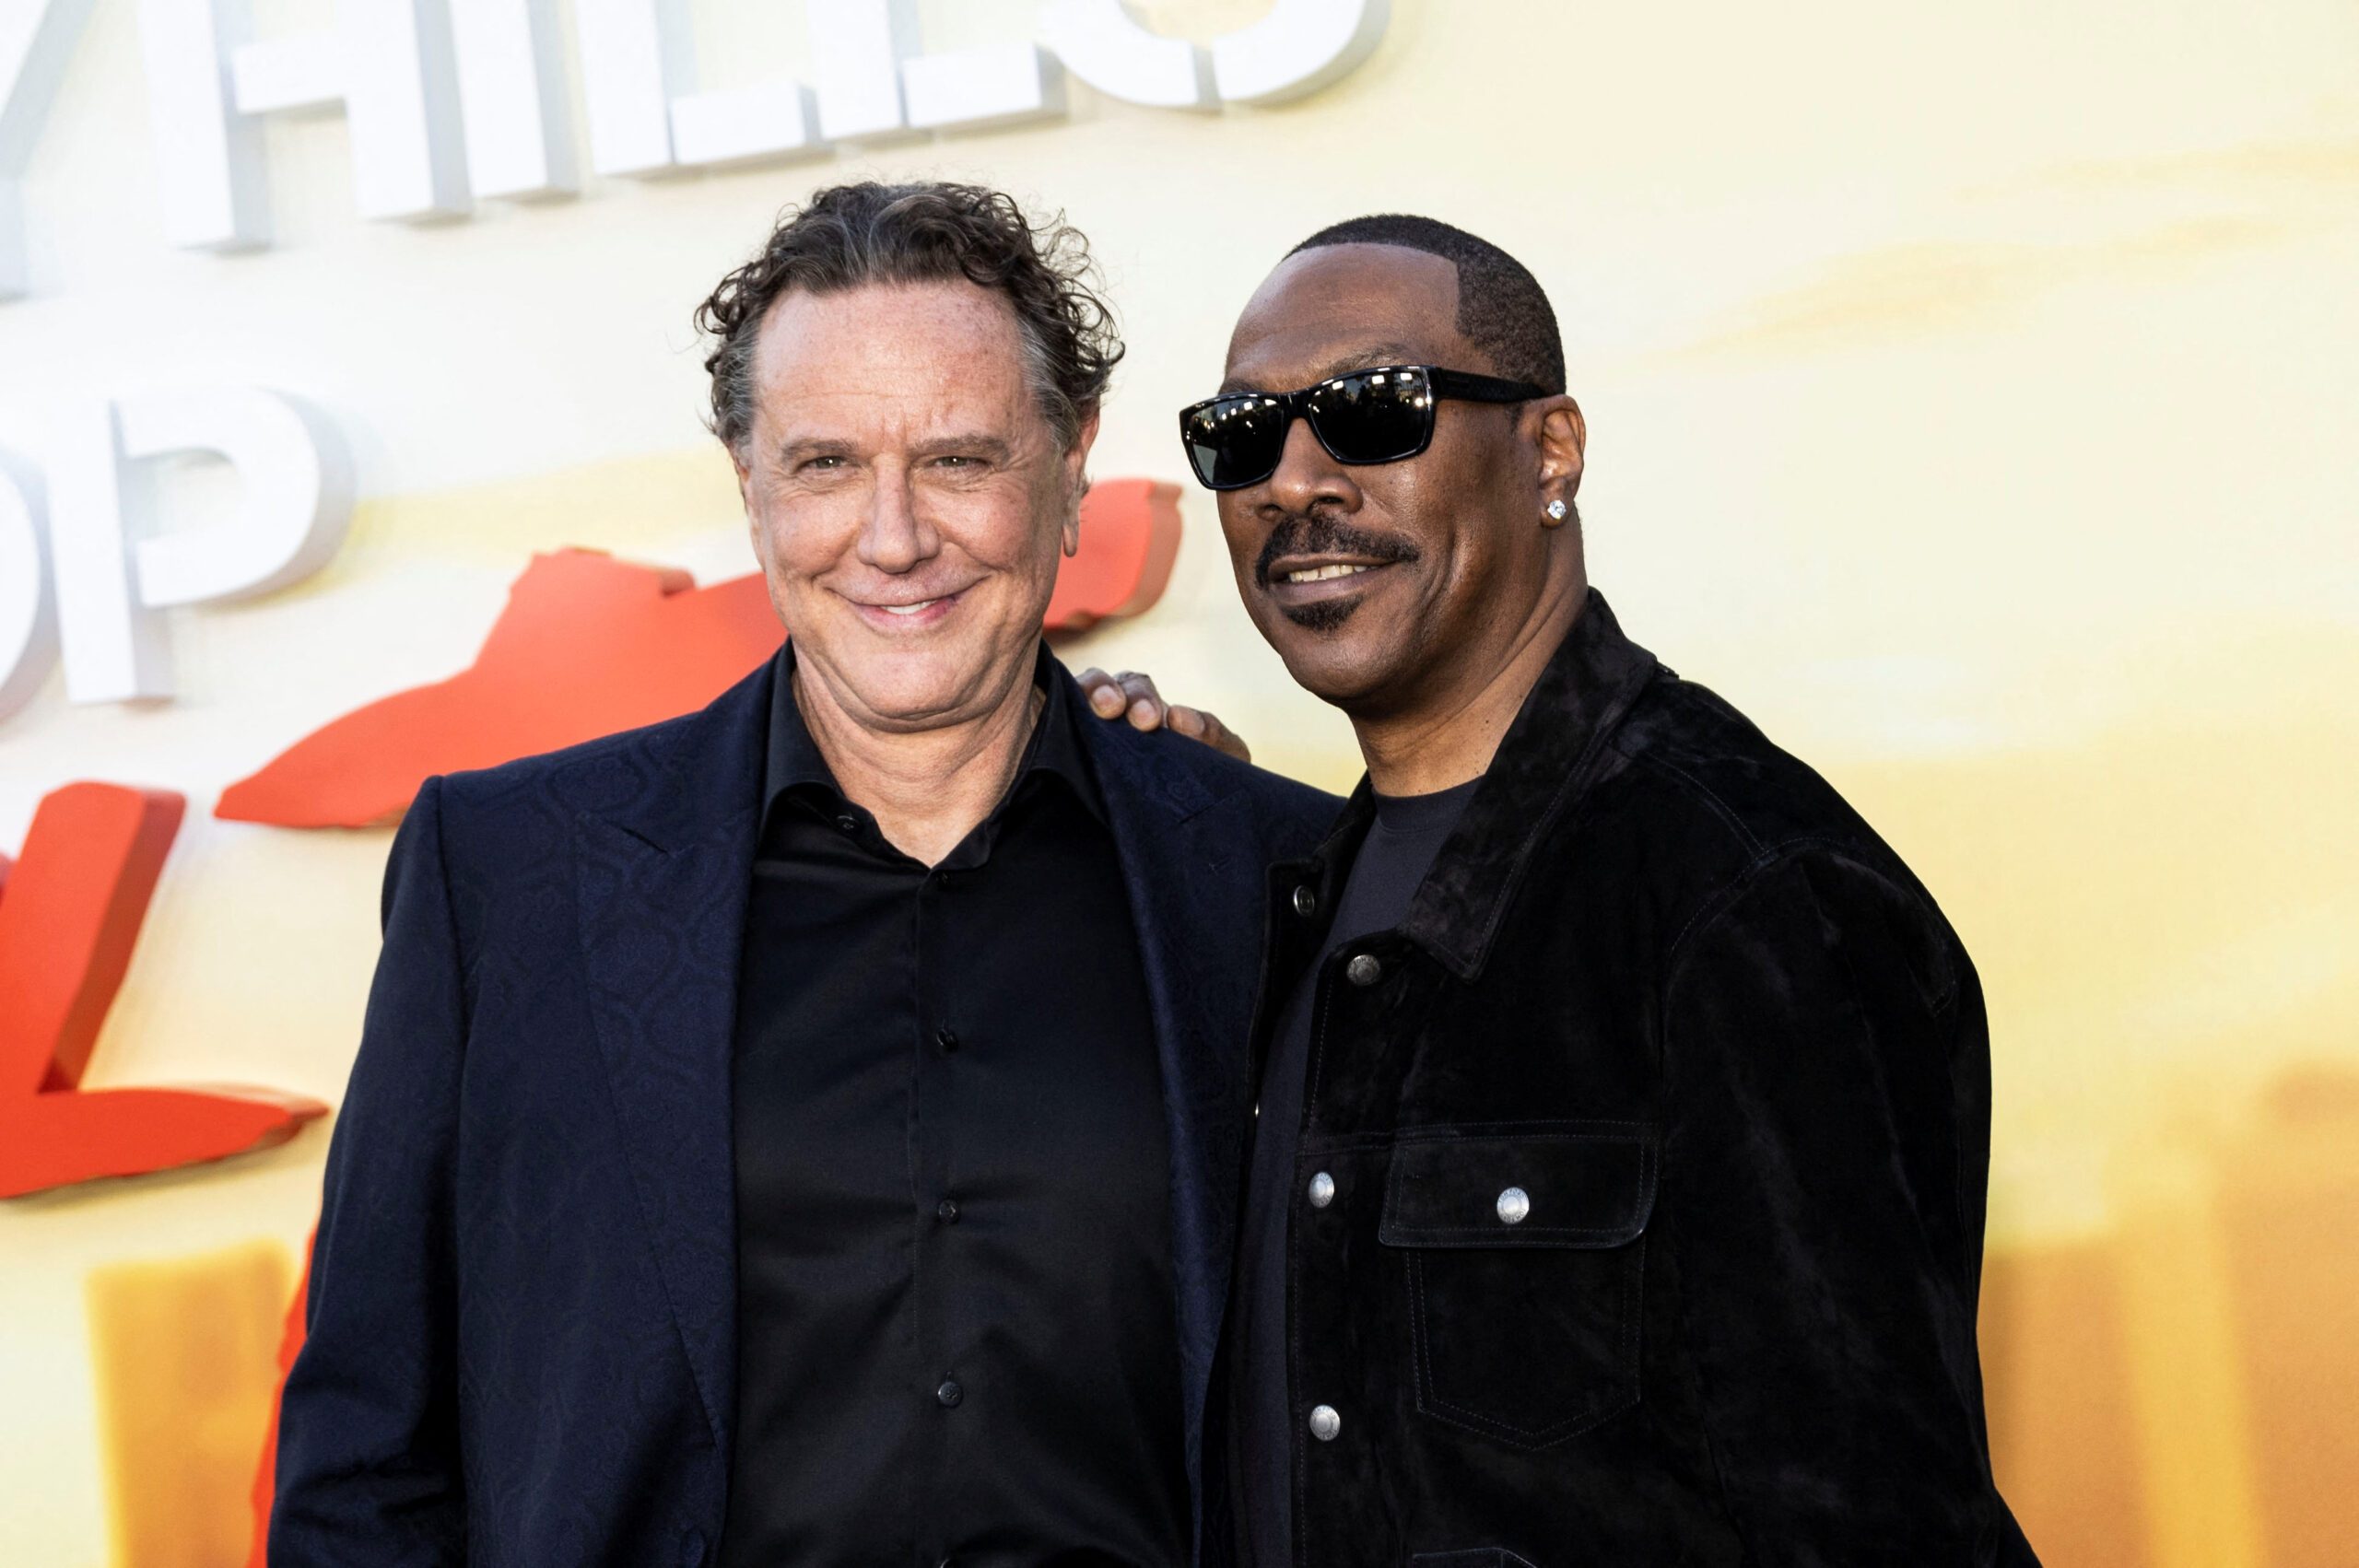 Eddie Murphy brings ’80s to modern day with new ‘Beverly Hills Cop’ film